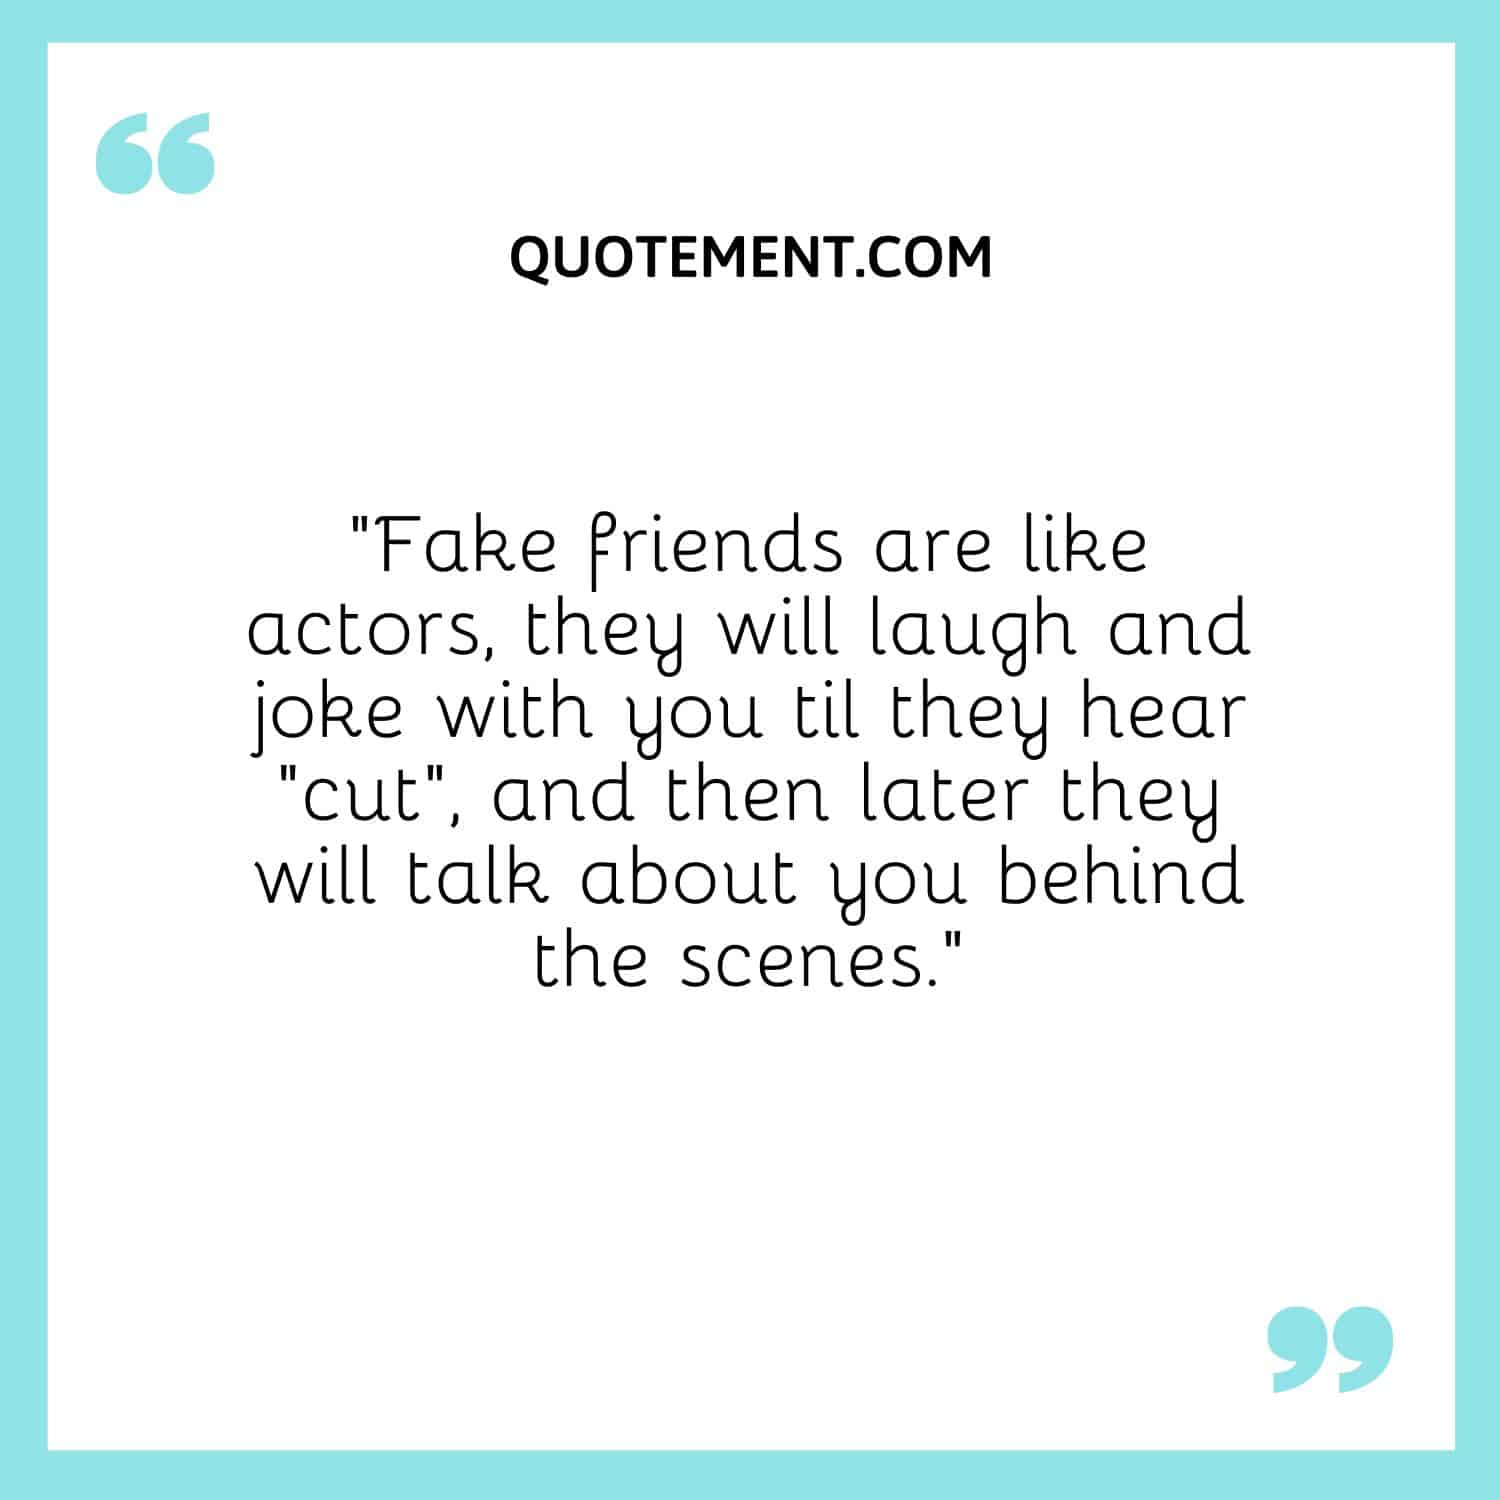 “Fake friends are like actors, they will laugh and joke with you til they hear “cut”, and then later they will talk about you behind the scenes.”